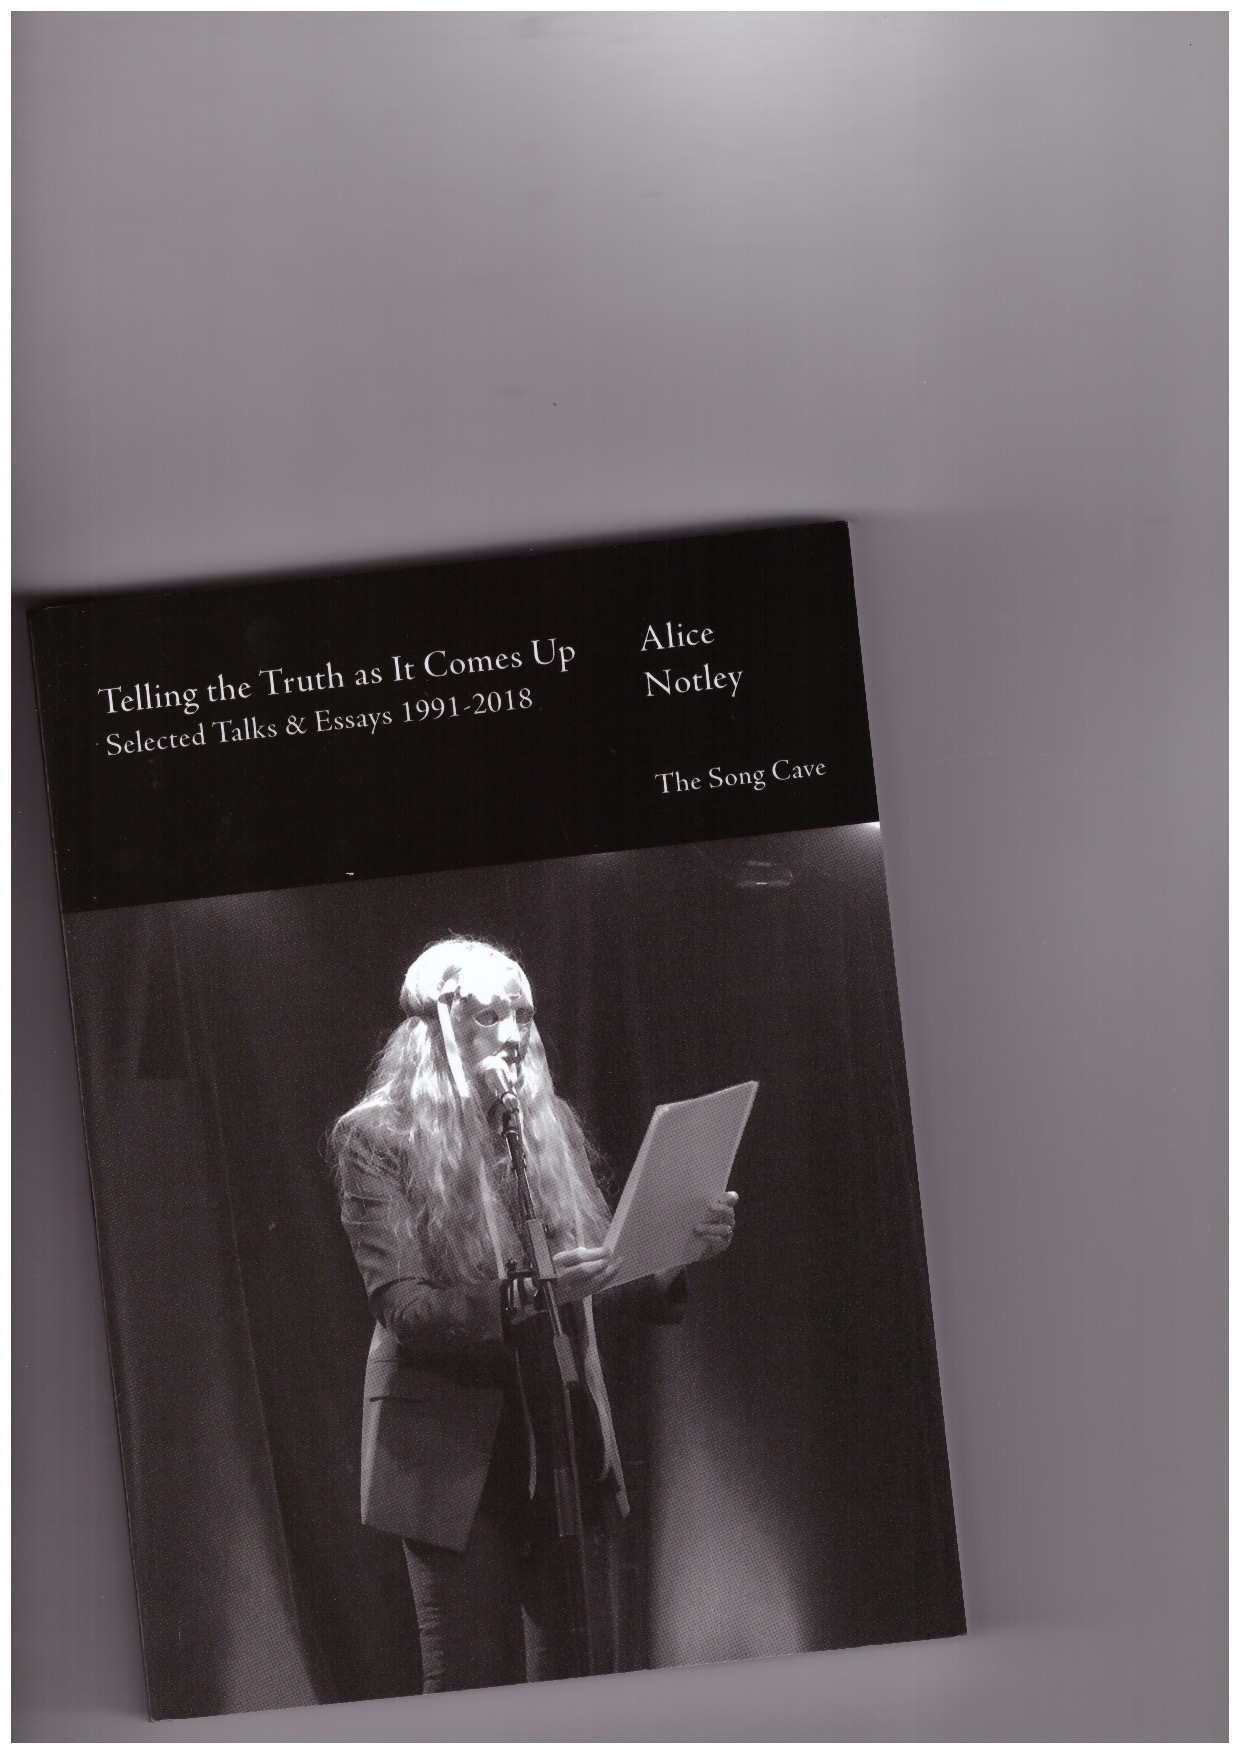 NOTLEY, Alice - Telling the Truth as It Comes Up: Selected Talks & Essays 1991-2018